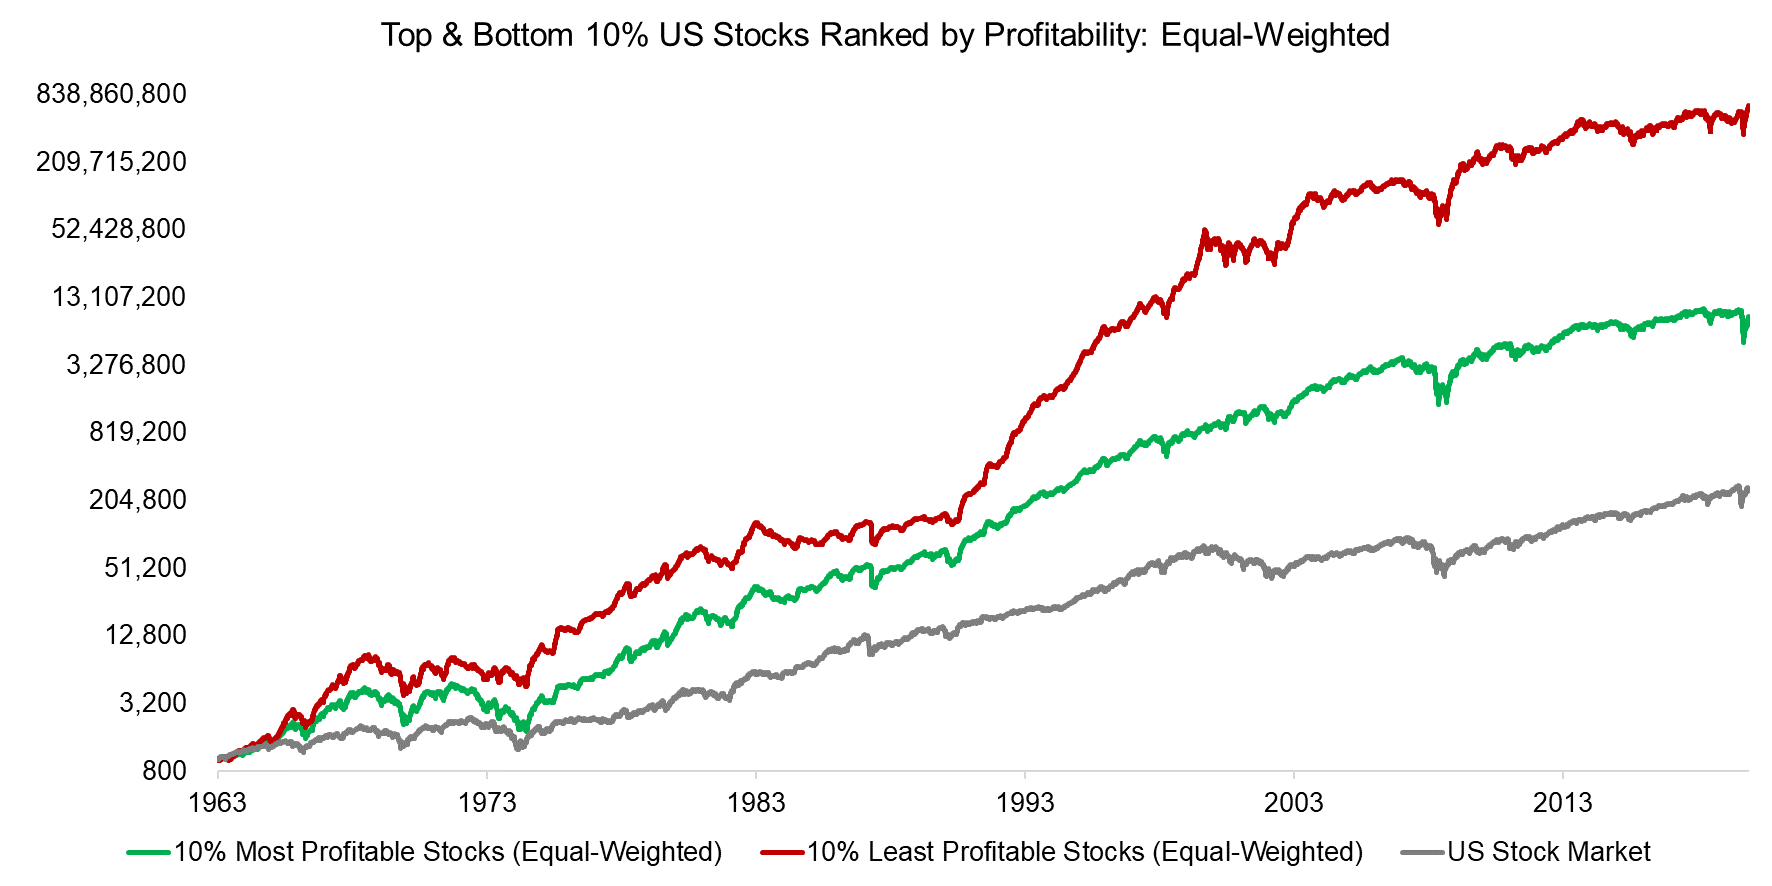 Top & Bottom 10% US Stocks Ranked by Profitability Equal-Weighted